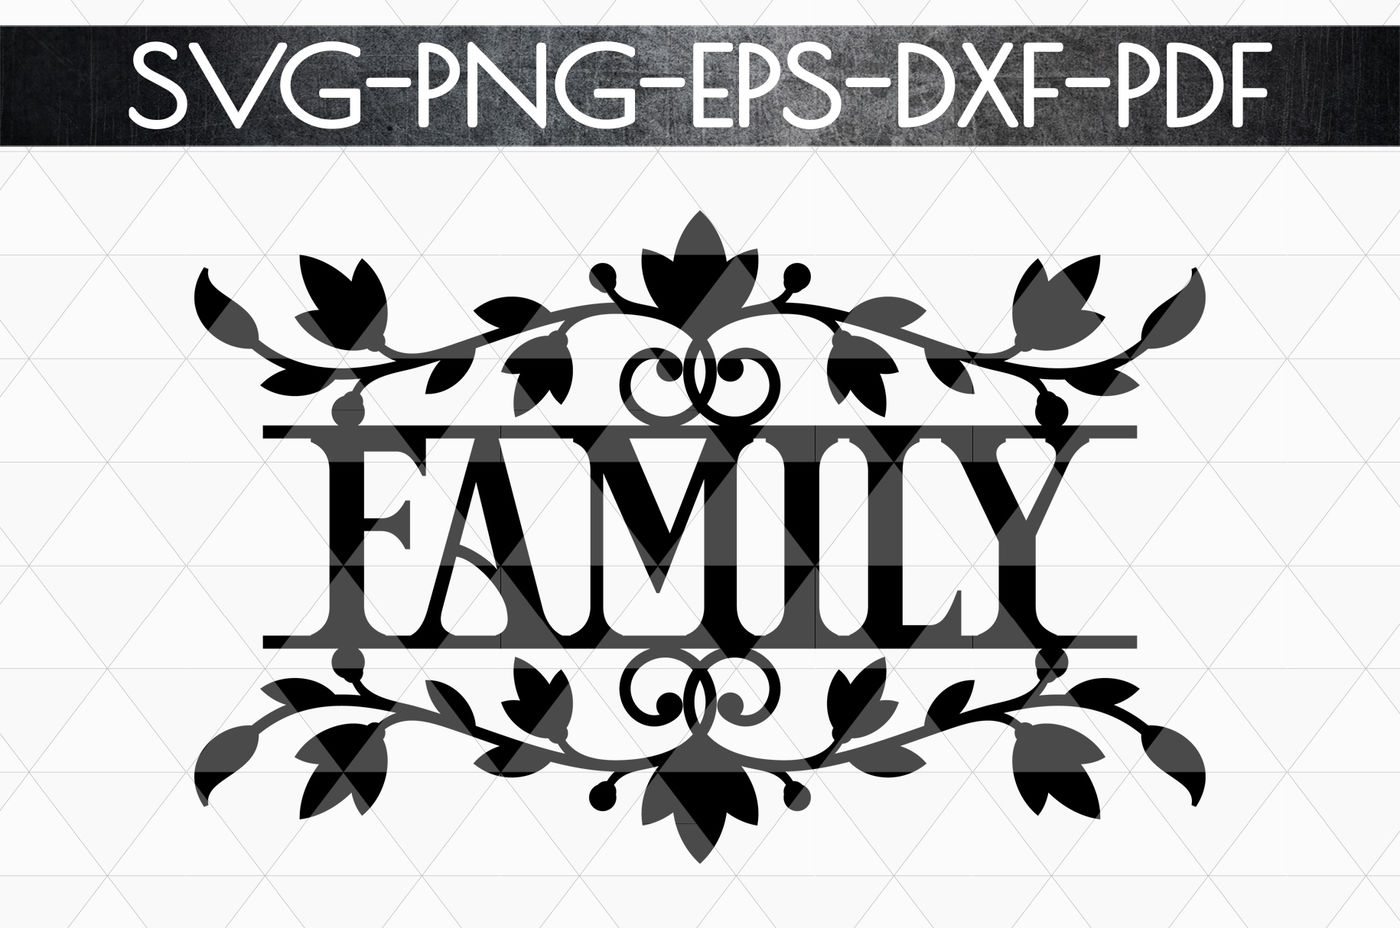 Download Family Sign Papercut Template Home Decor Svg Eps Pdf By Mulia Designs Thehungryjpeg Com